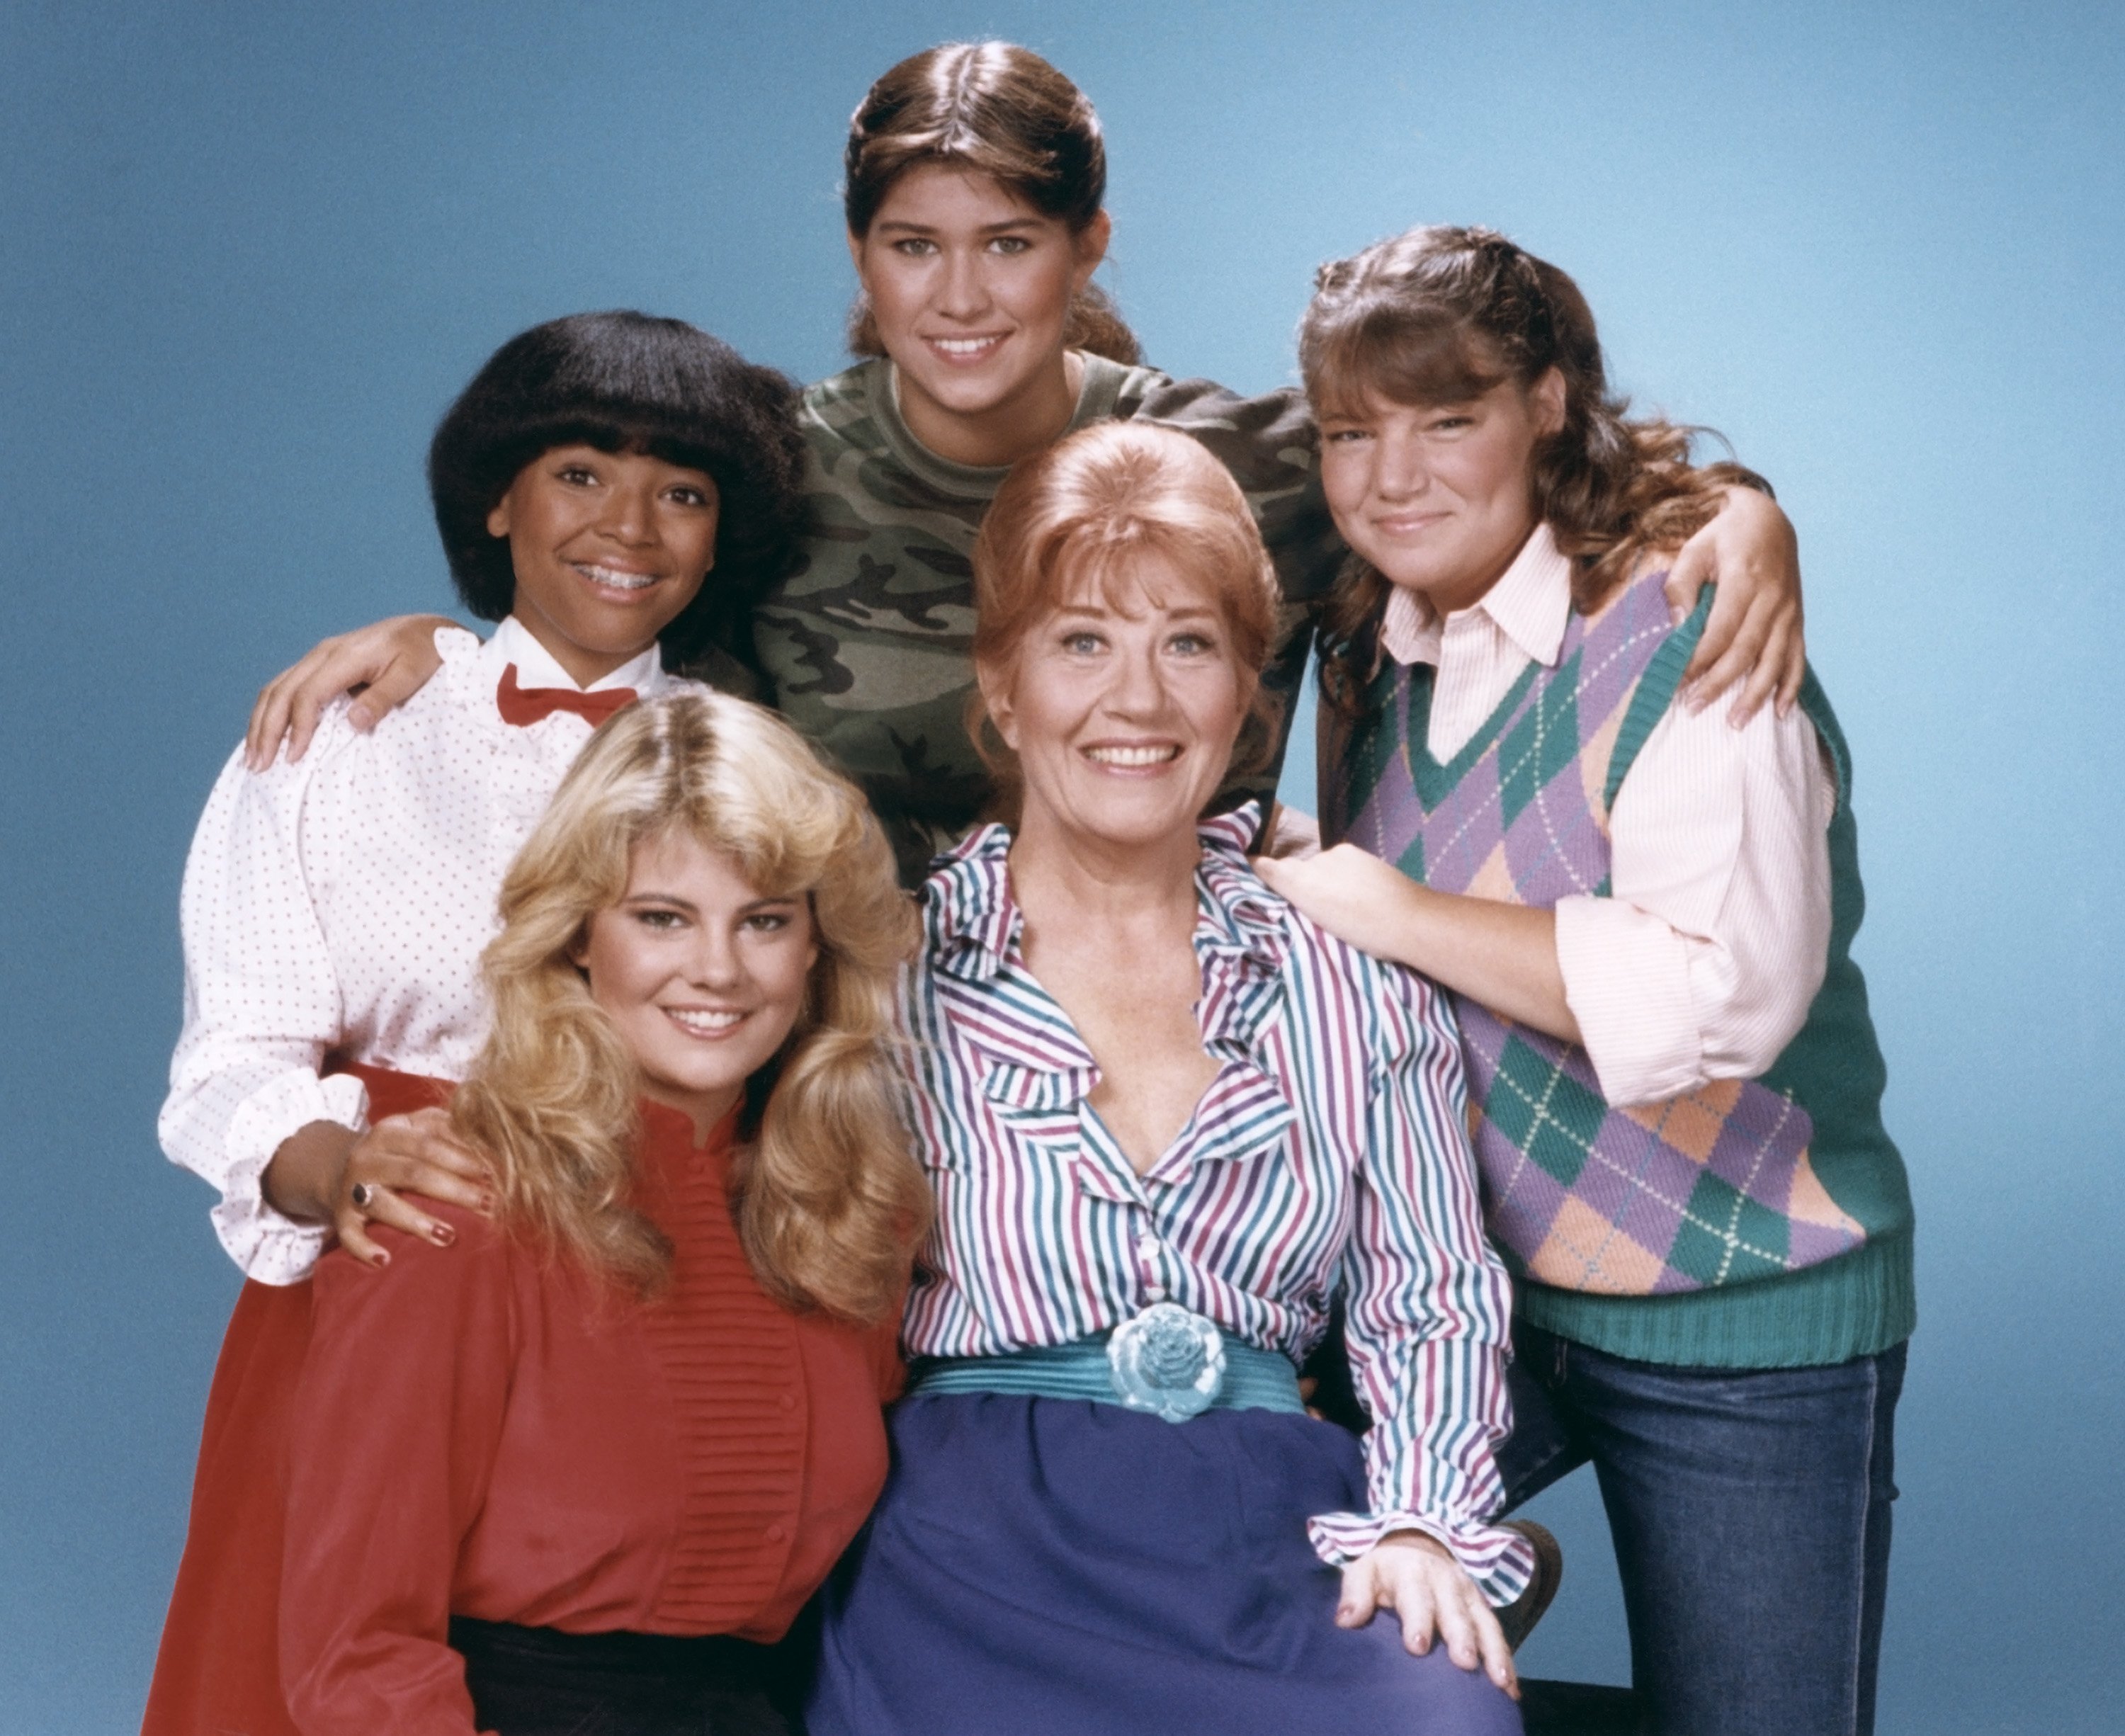 Nancy McKeon, Mindy Cohn, Charlotte Rae, Lisa Whelchel and Kim Fields on the set of "The facts of life" |  Source: Getty Images